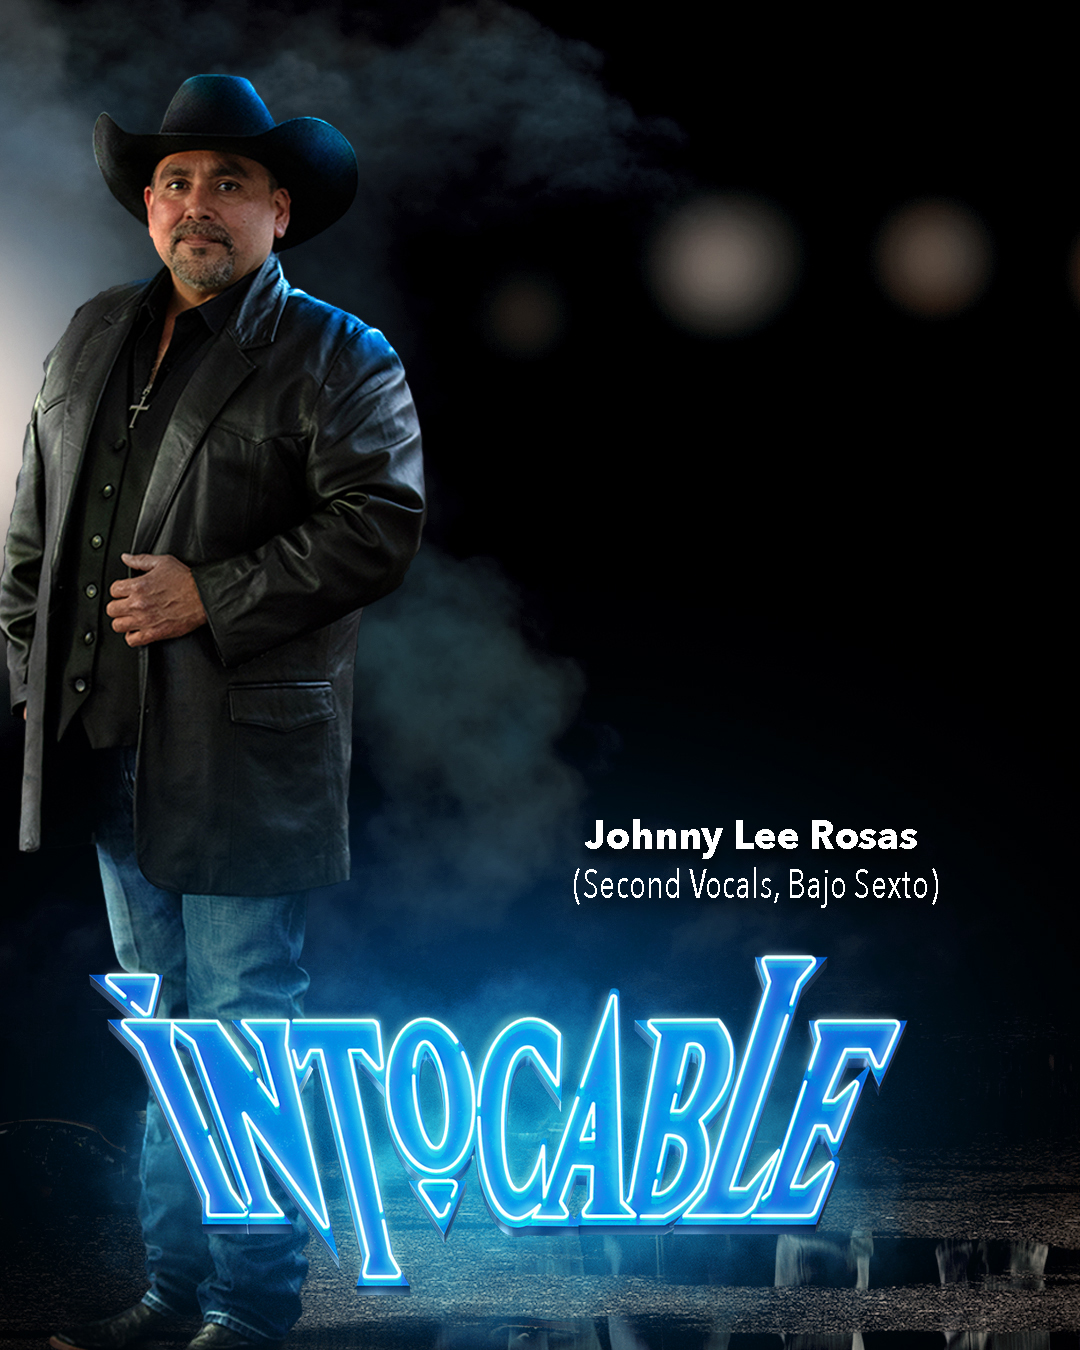 About - Grupo Intocable